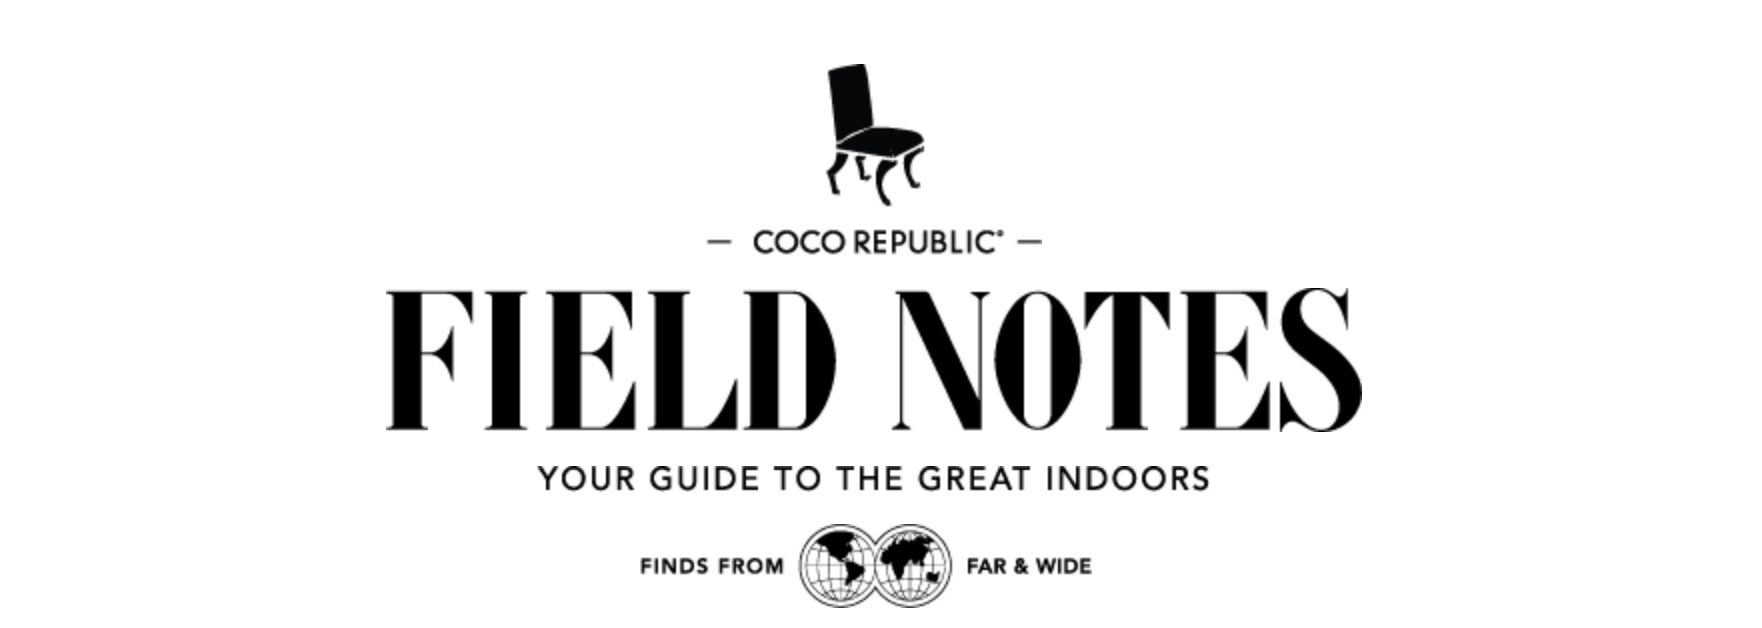 Naming & Tagline for CoCo Republic “Field Notes” Blog